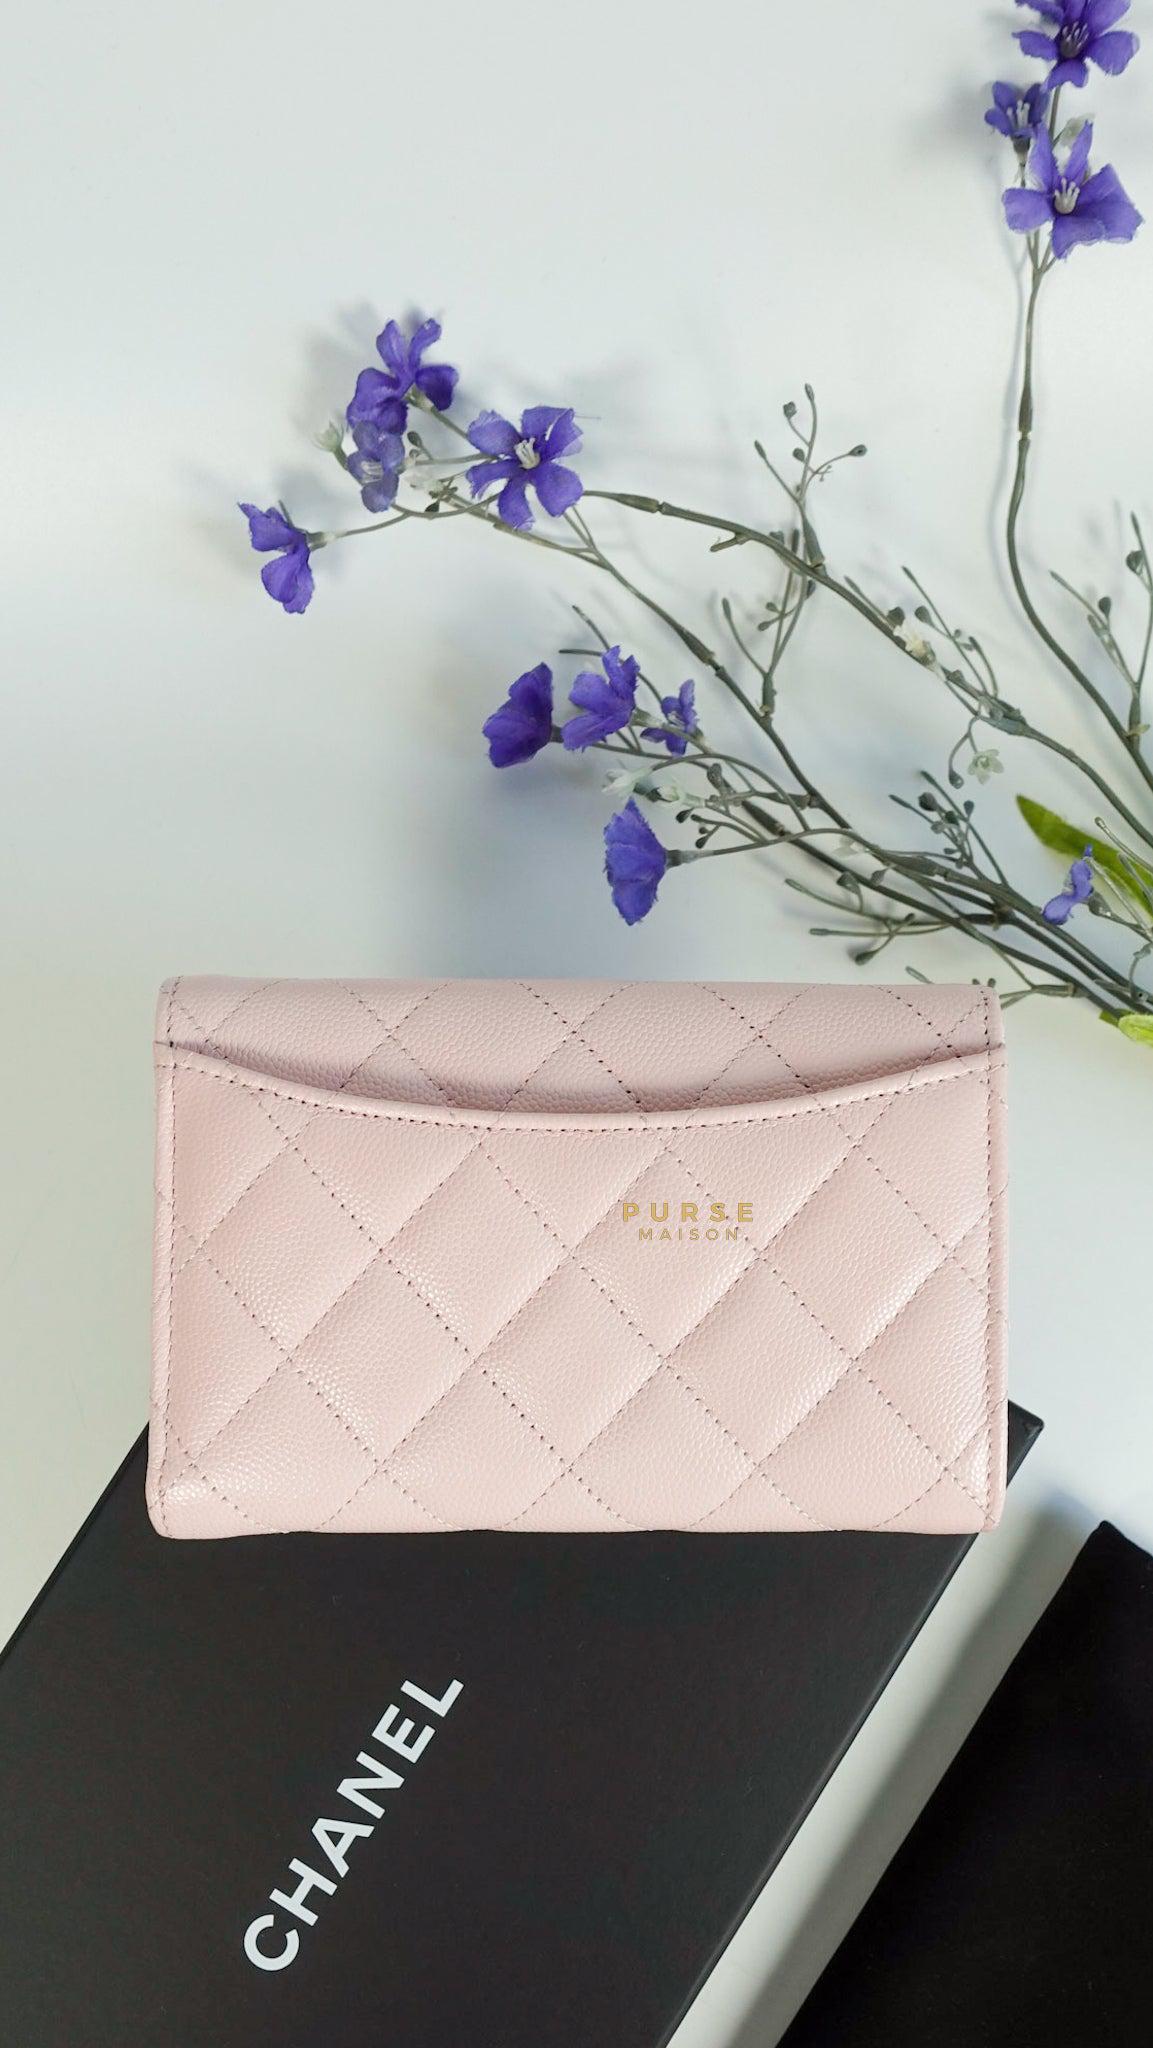 UNBOXING Chanel 21S light pink classic small wallet in Celine Pico